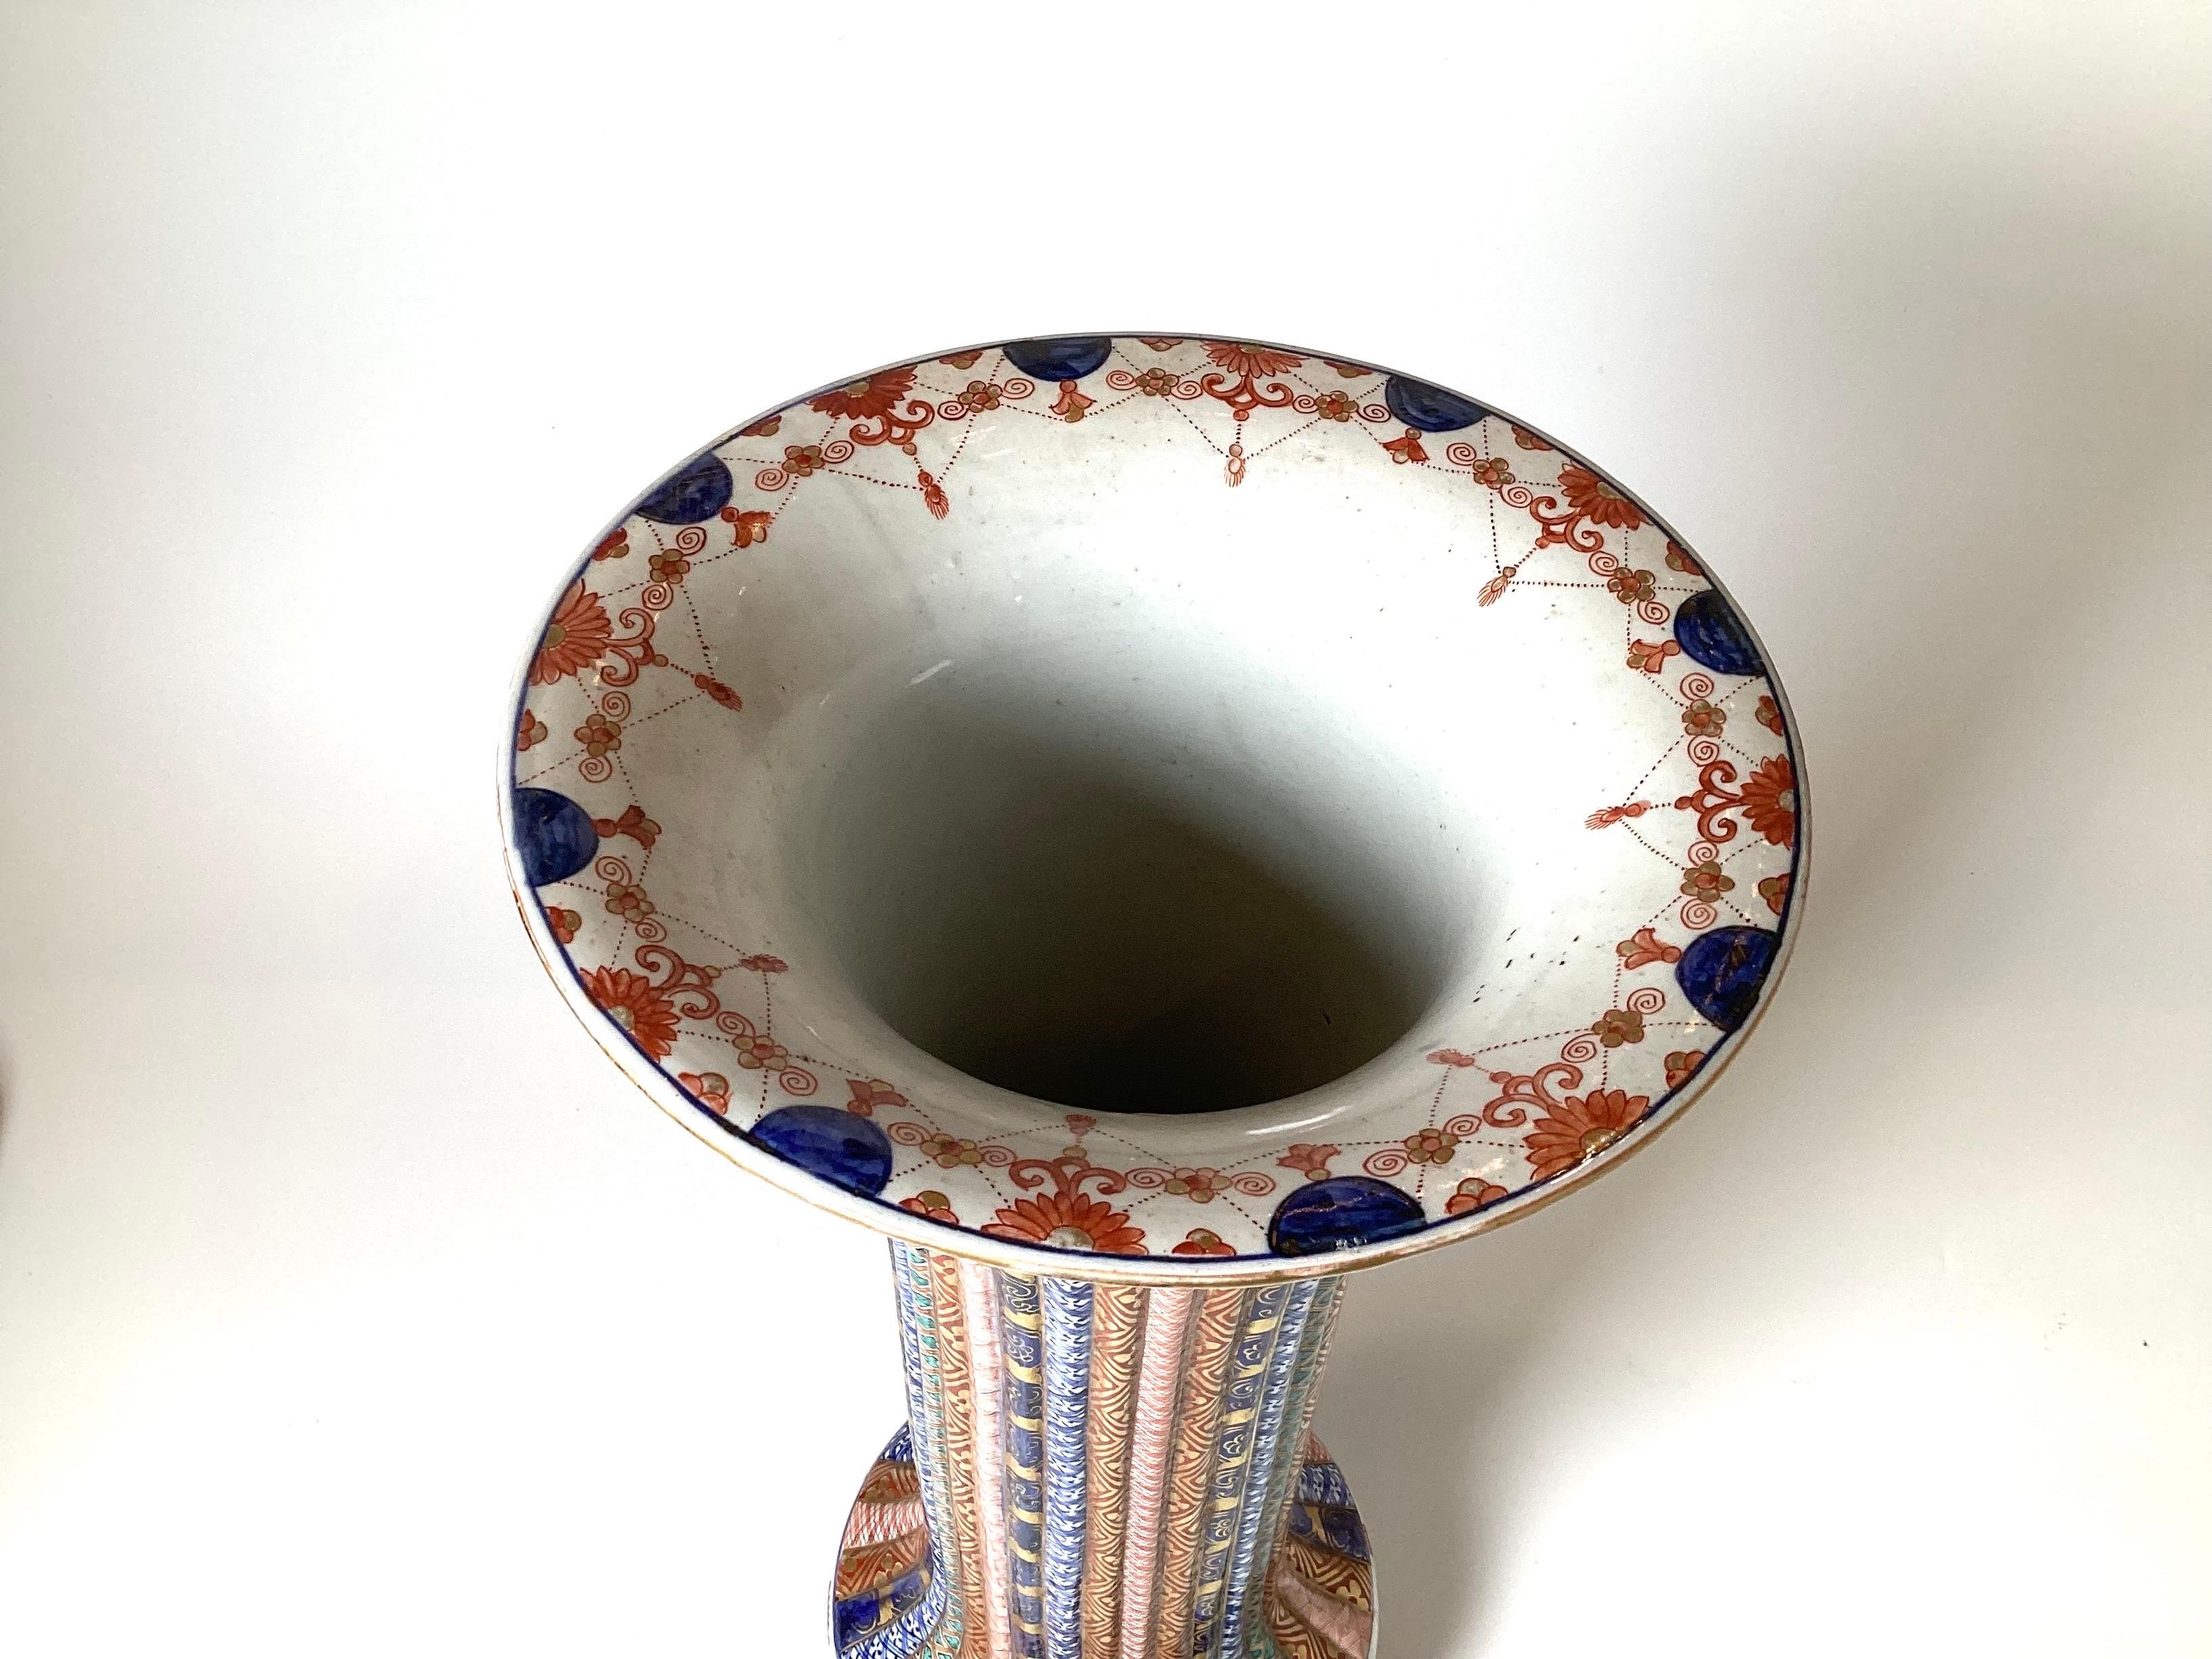 A remarkable hand painted Japanese Imari porcelain trumpet vase with ribbed body and profuse decoration. This vase is very rare and unique in its decoration and quality of the artist painting. Measure: 21.5 inches tall.